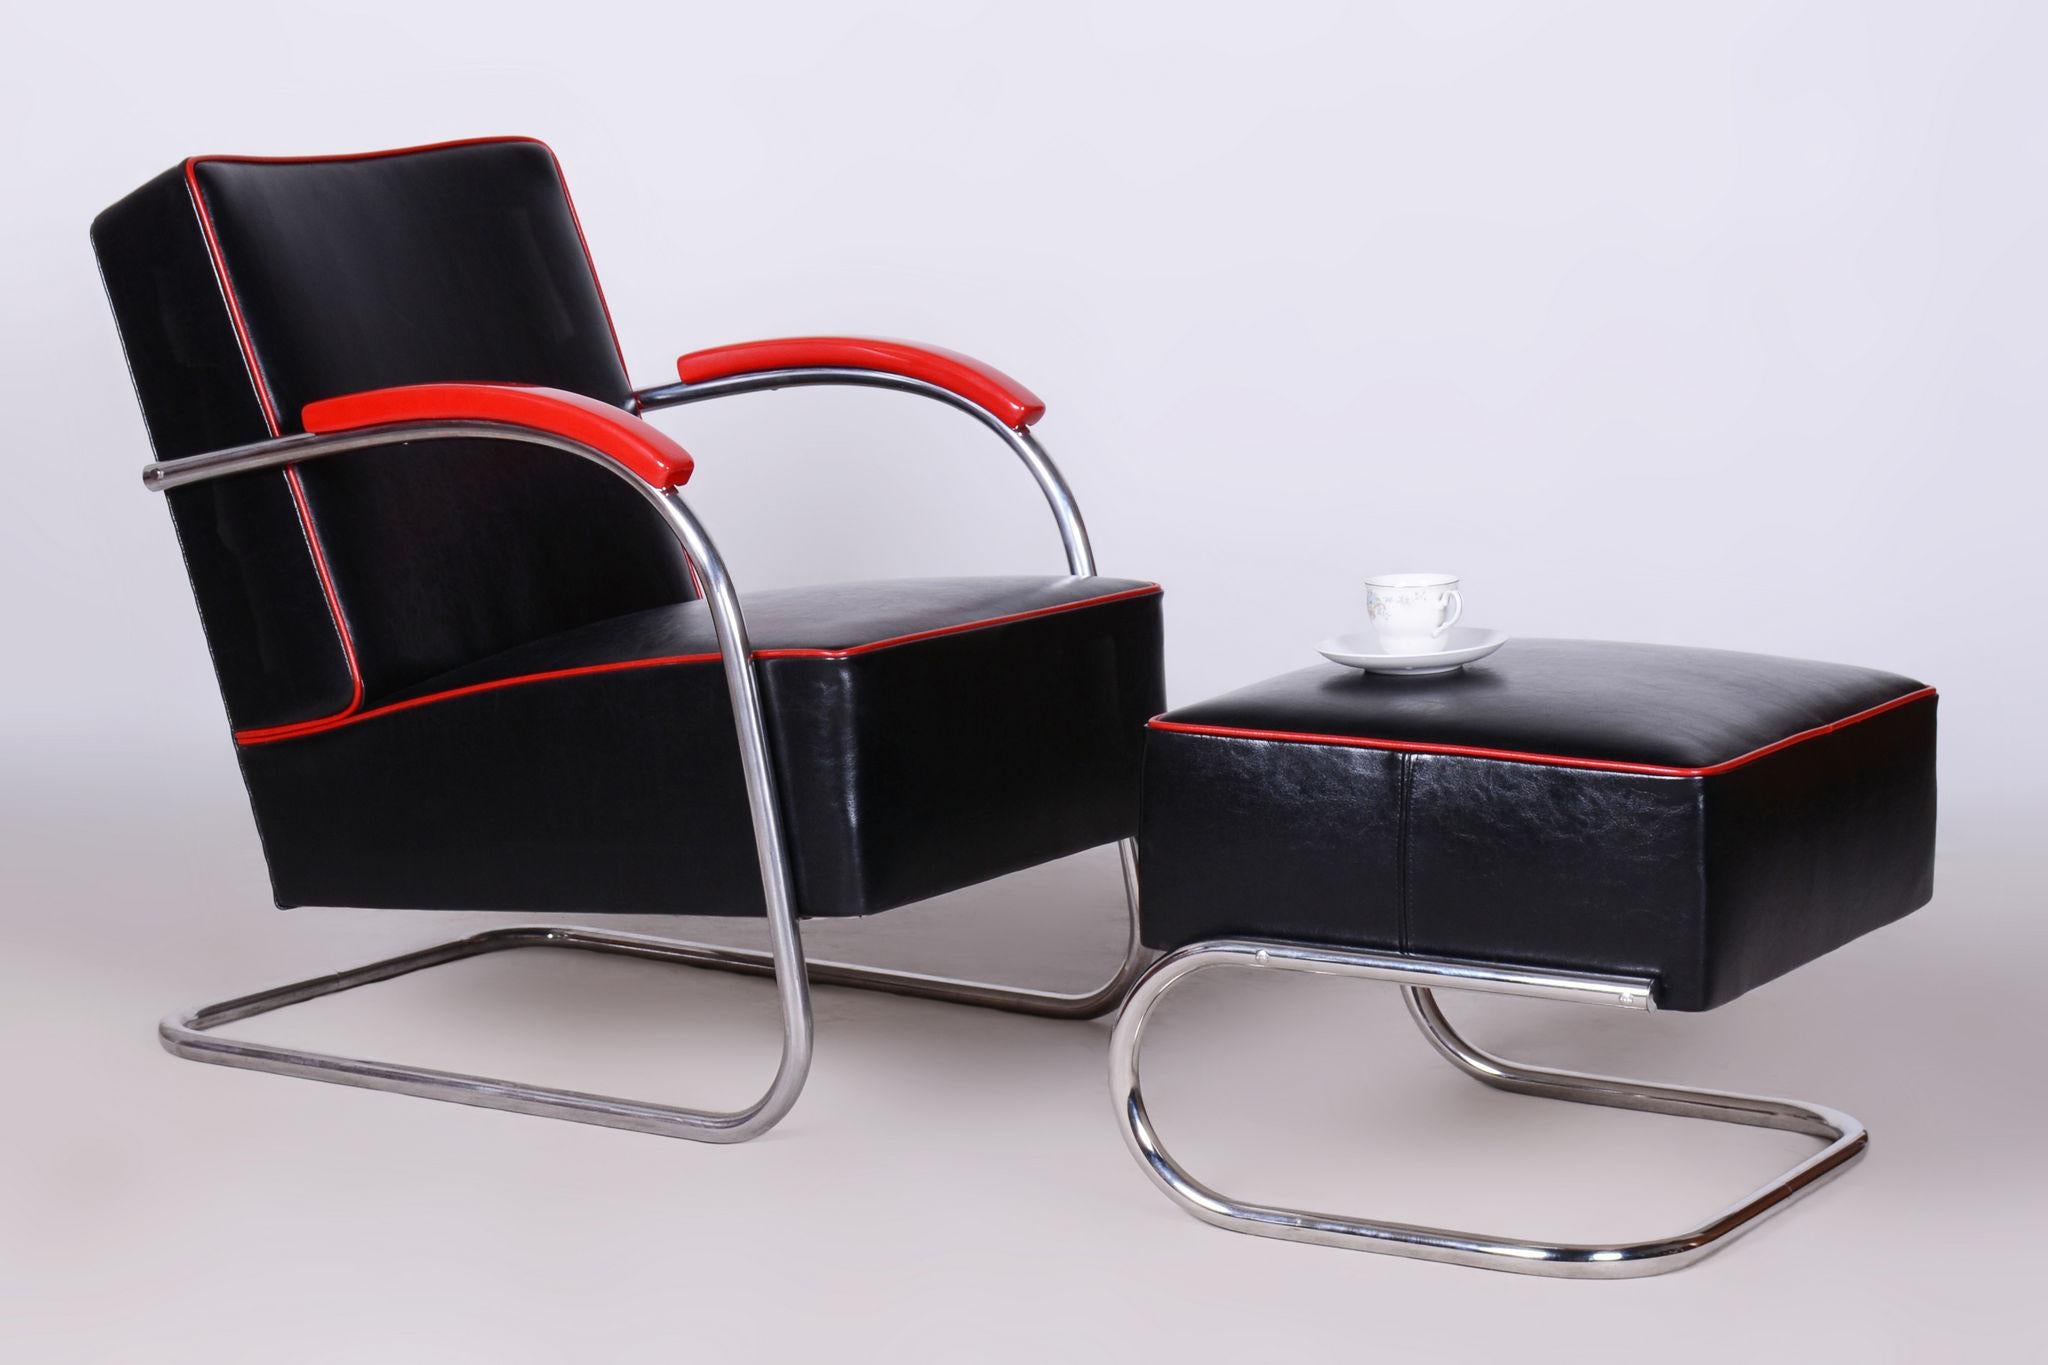 Restored Bauhaus Armchair with Foot Stool, by Mücke-Melder, Steel, Czech, 1930s In Good Condition For Sale In Horomerice, CZ